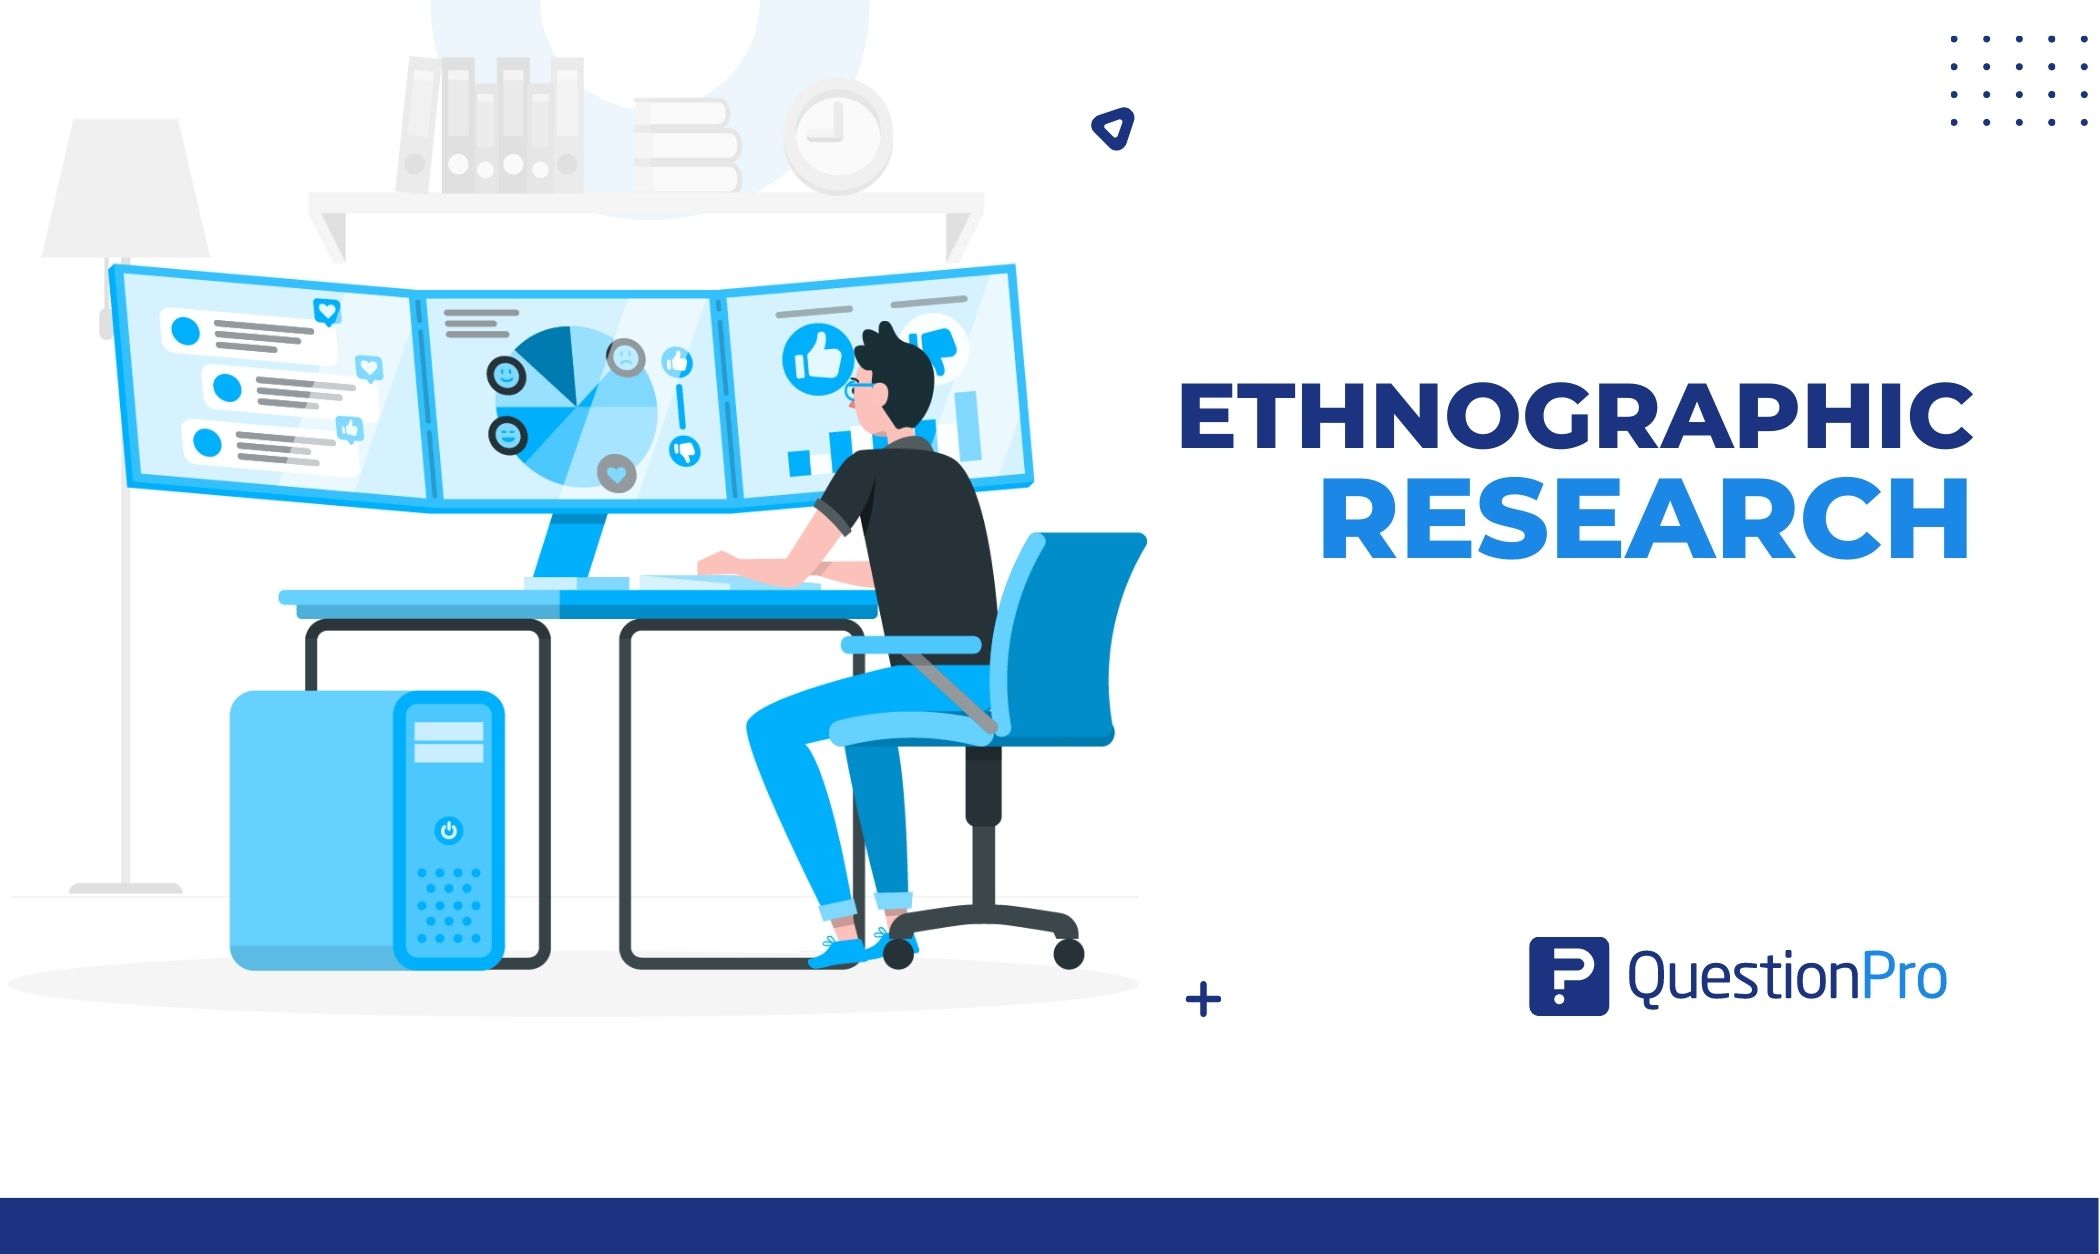 Ethnographic research uses close observation and participation to learn about the culture of a group, community, or organization.